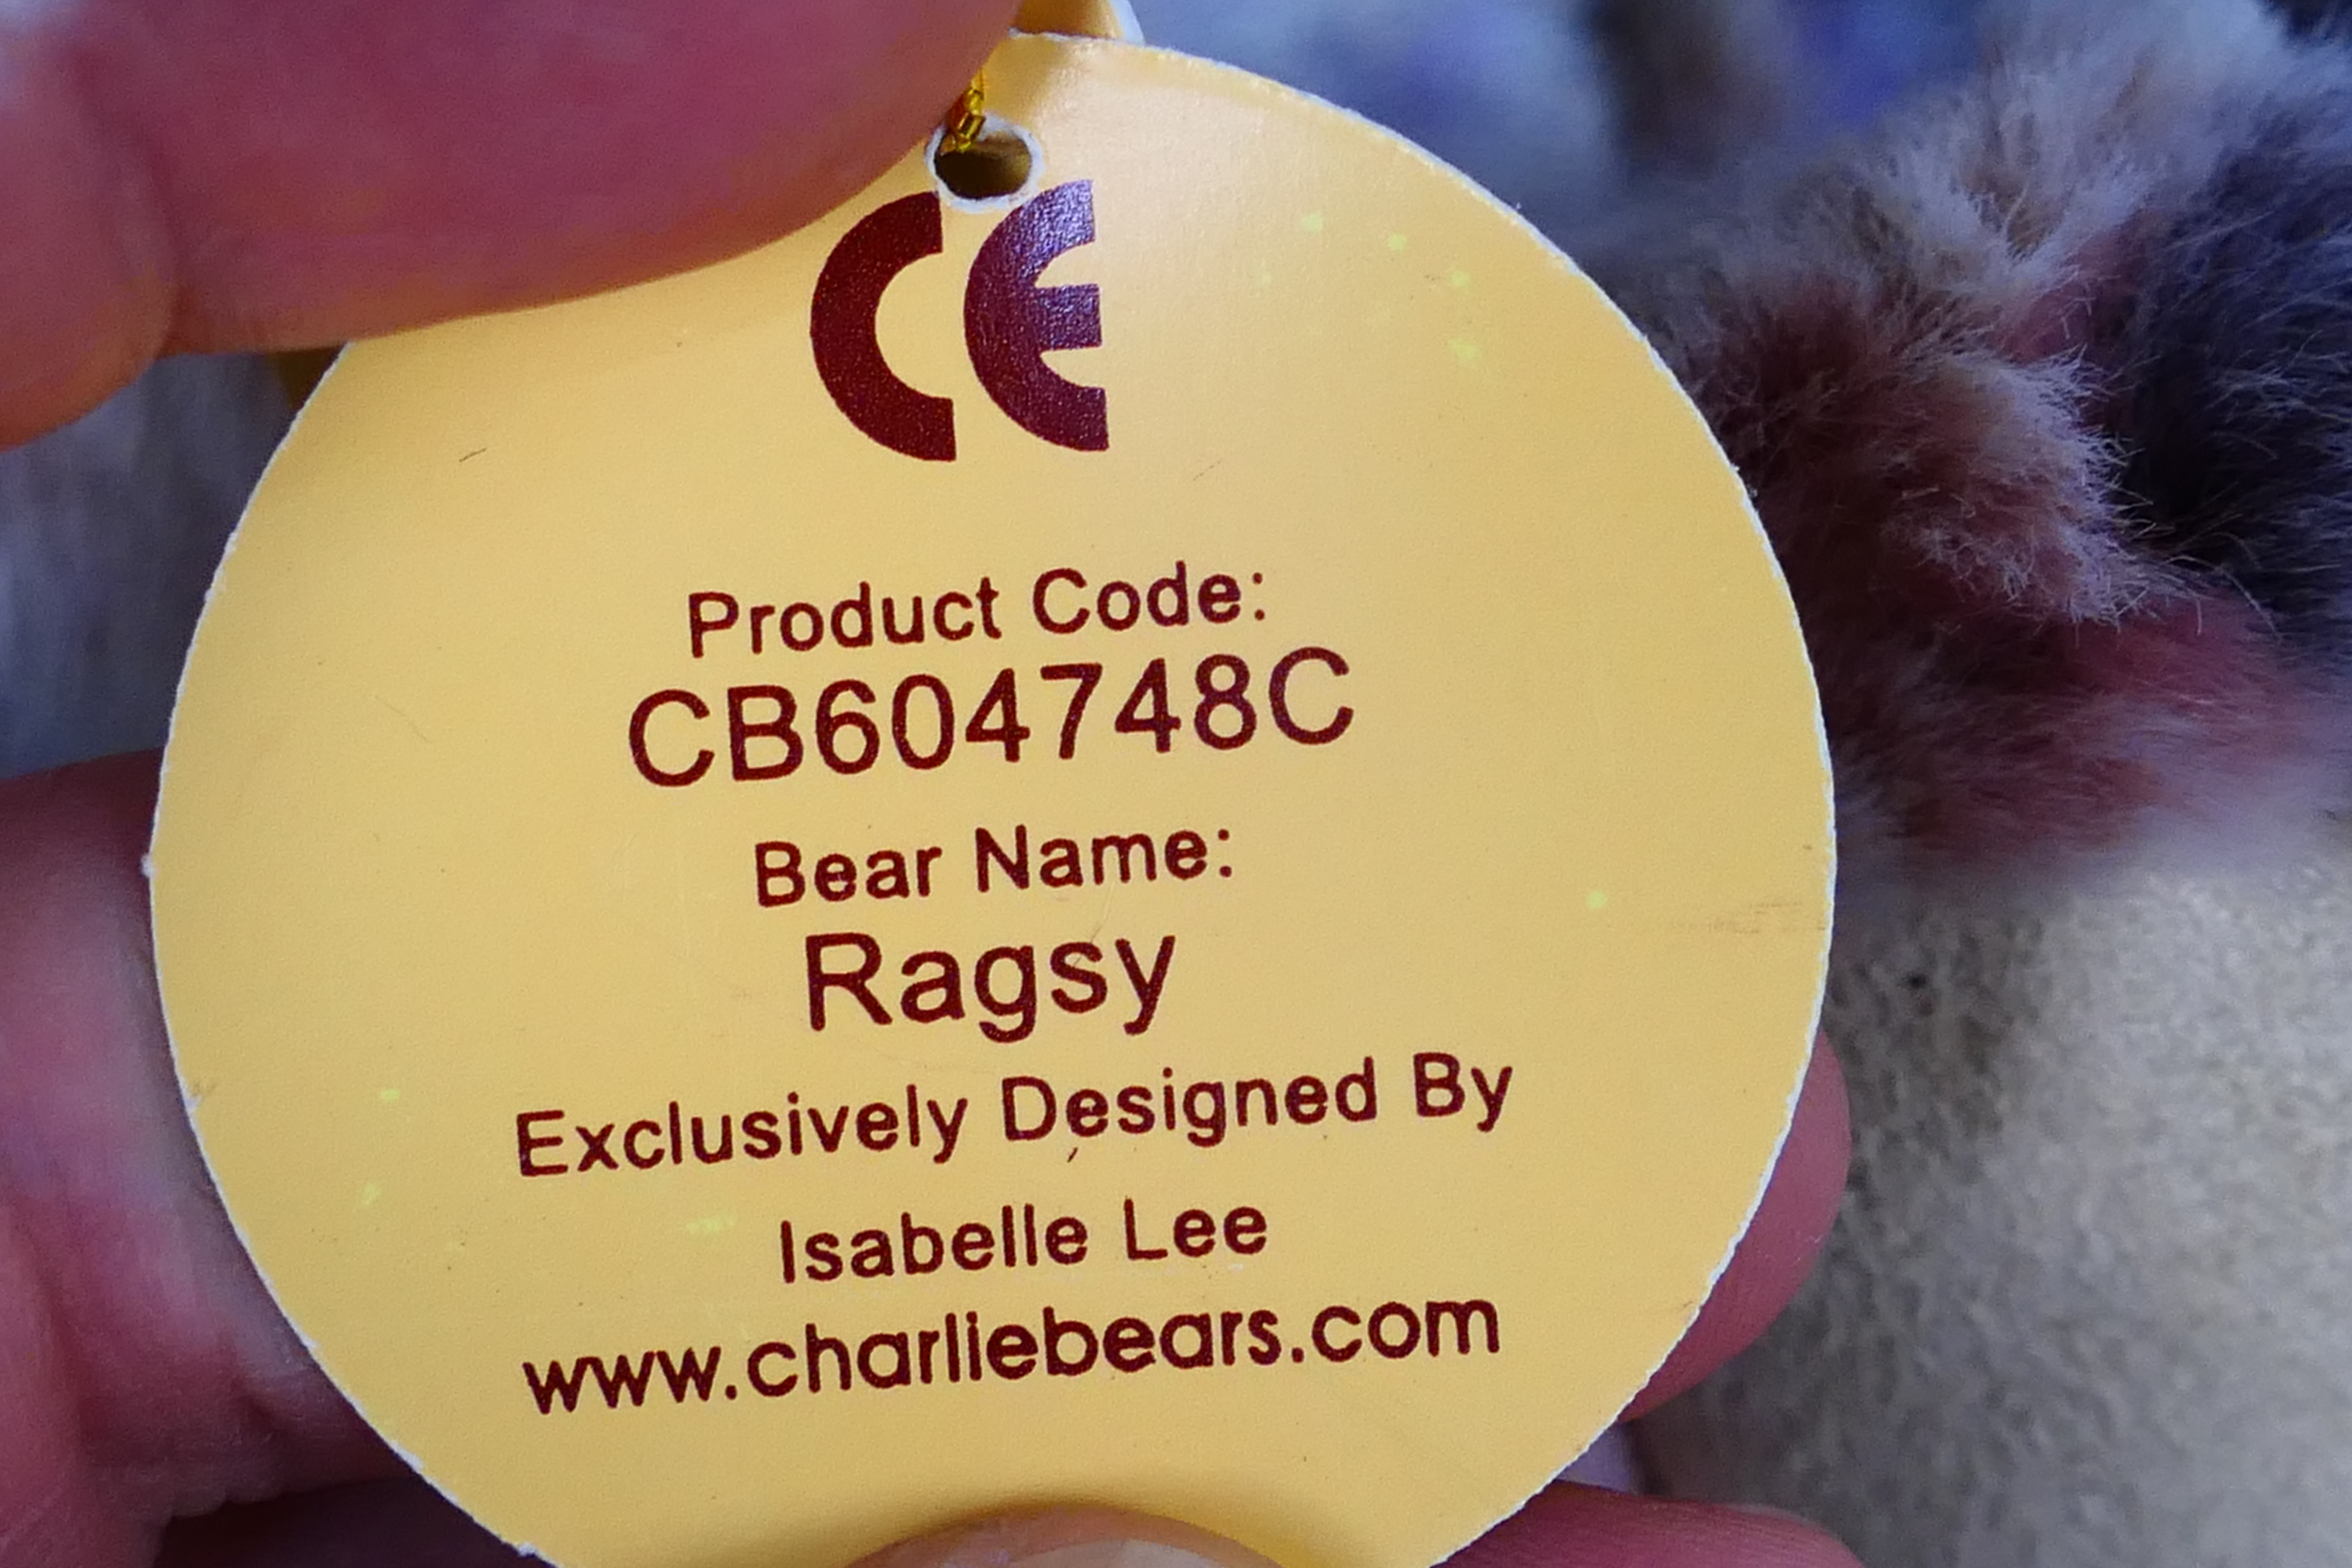 Charlie Bears - A Charlie Bears soft toy teddy bear #CB604748C 'Ragsy', designed by Isabelle Lee, - Image 4 of 5